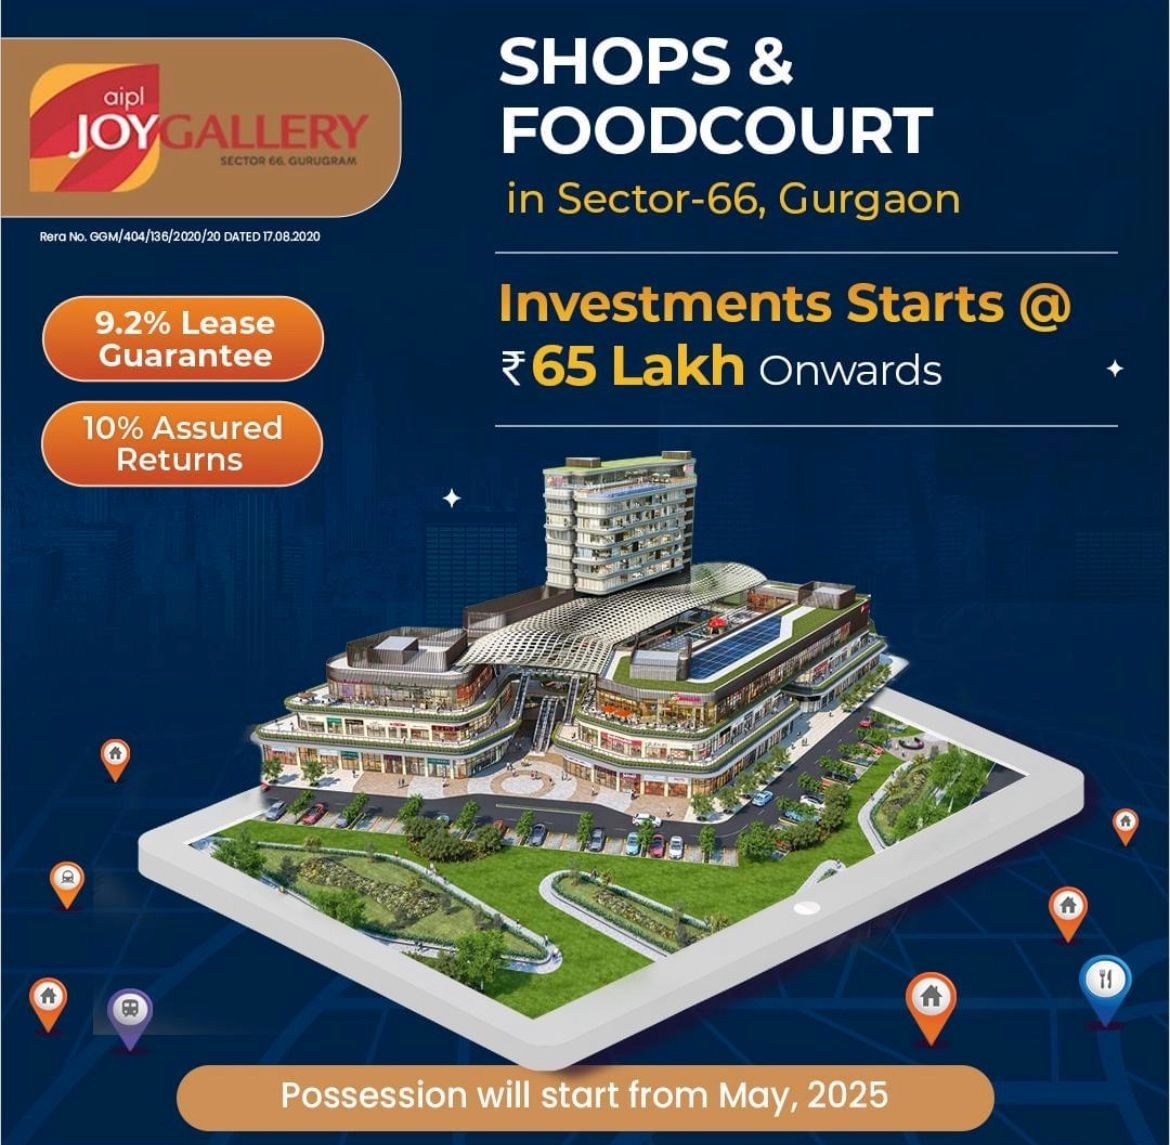 Possession will start form May 2025 at AIPL Joy Gallery in Sector 66, Gurgaon